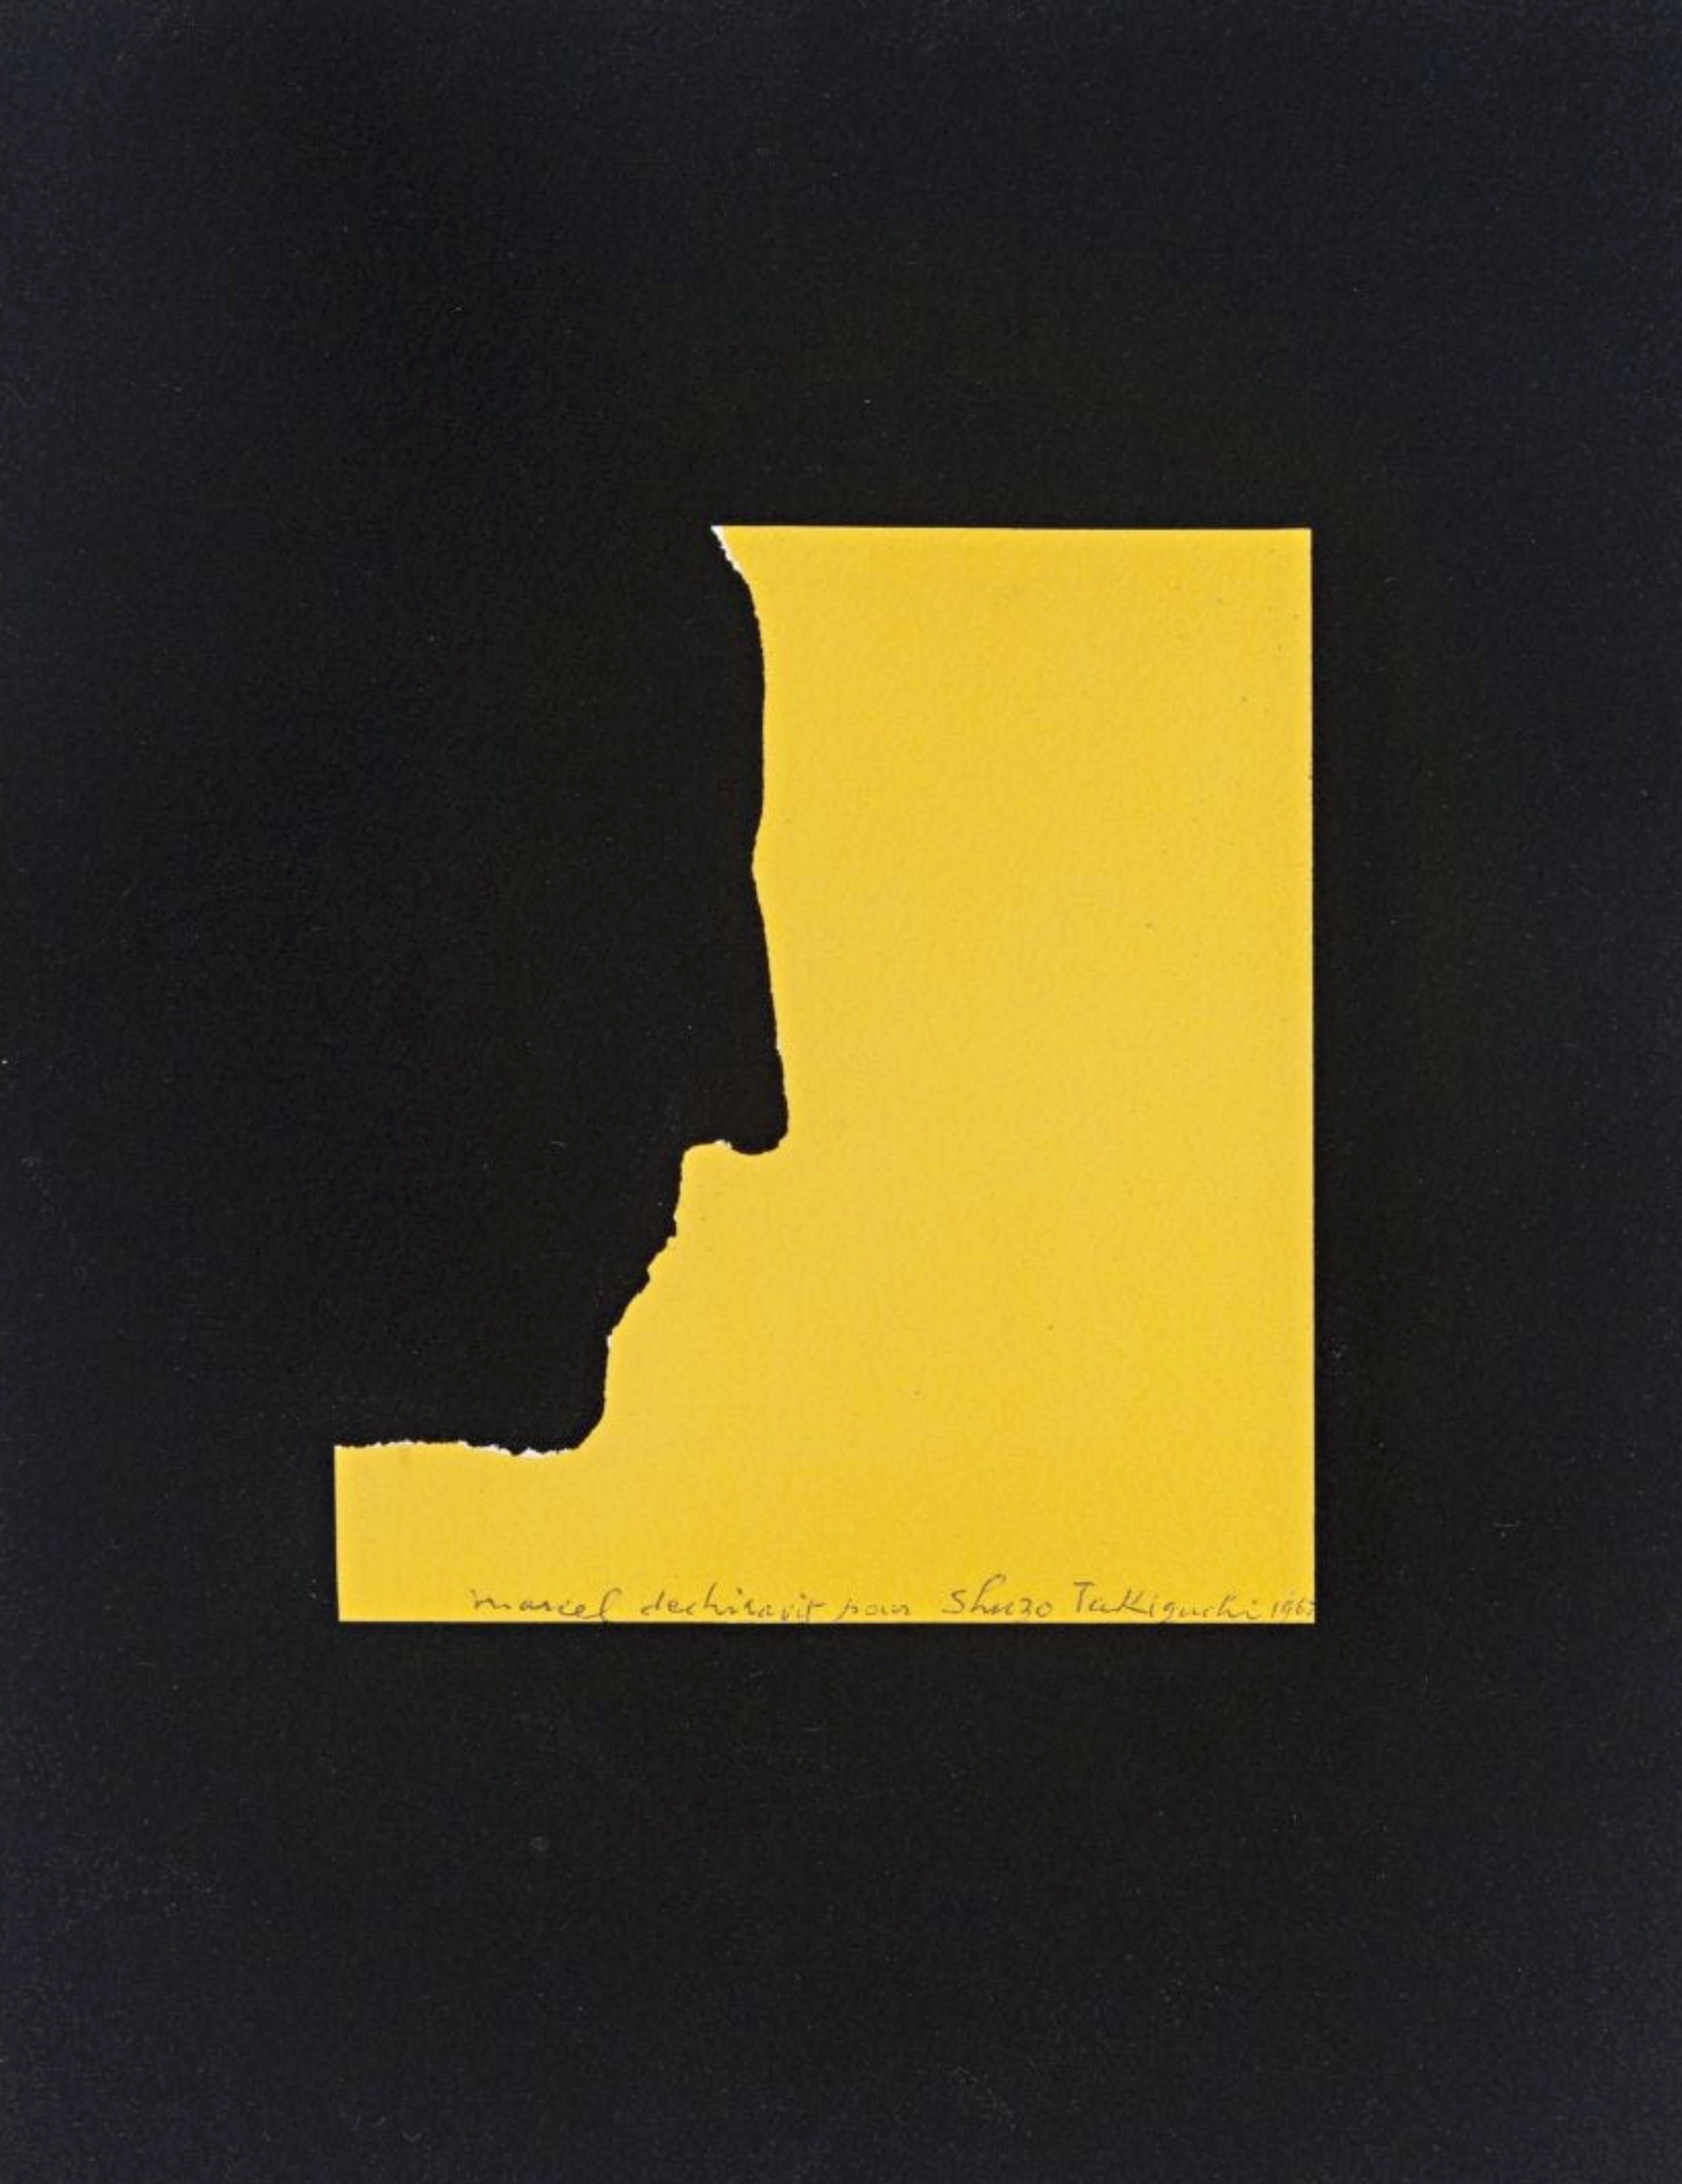 Self Portrait in Profile (Schwarz 344) from To and From Rrose Selavy (Duchamp)